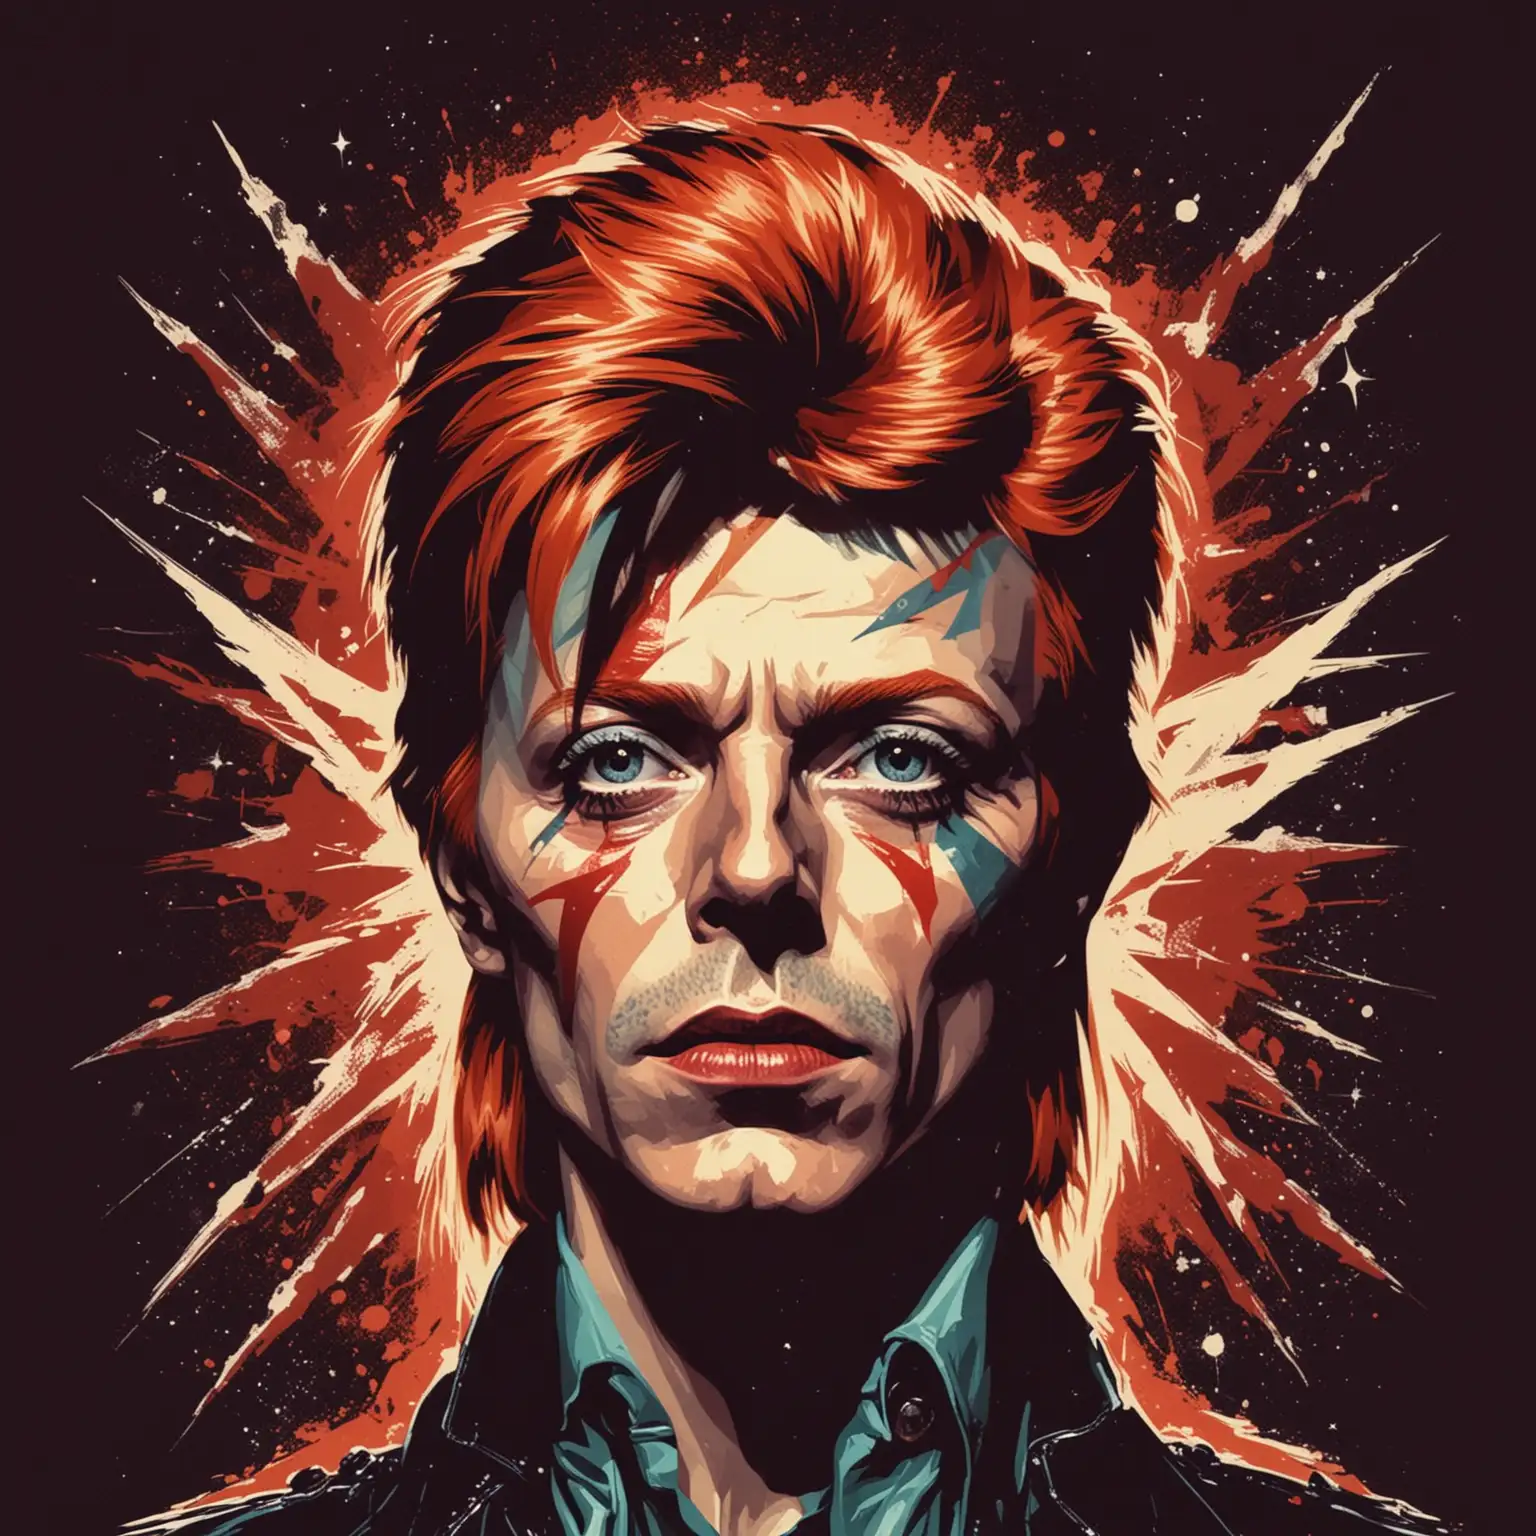 make me a portrait for a cover like The Rise And Fall Of Ziggy Stardust And The Spiders From Mars David Bowie in a cool vector style without text on it